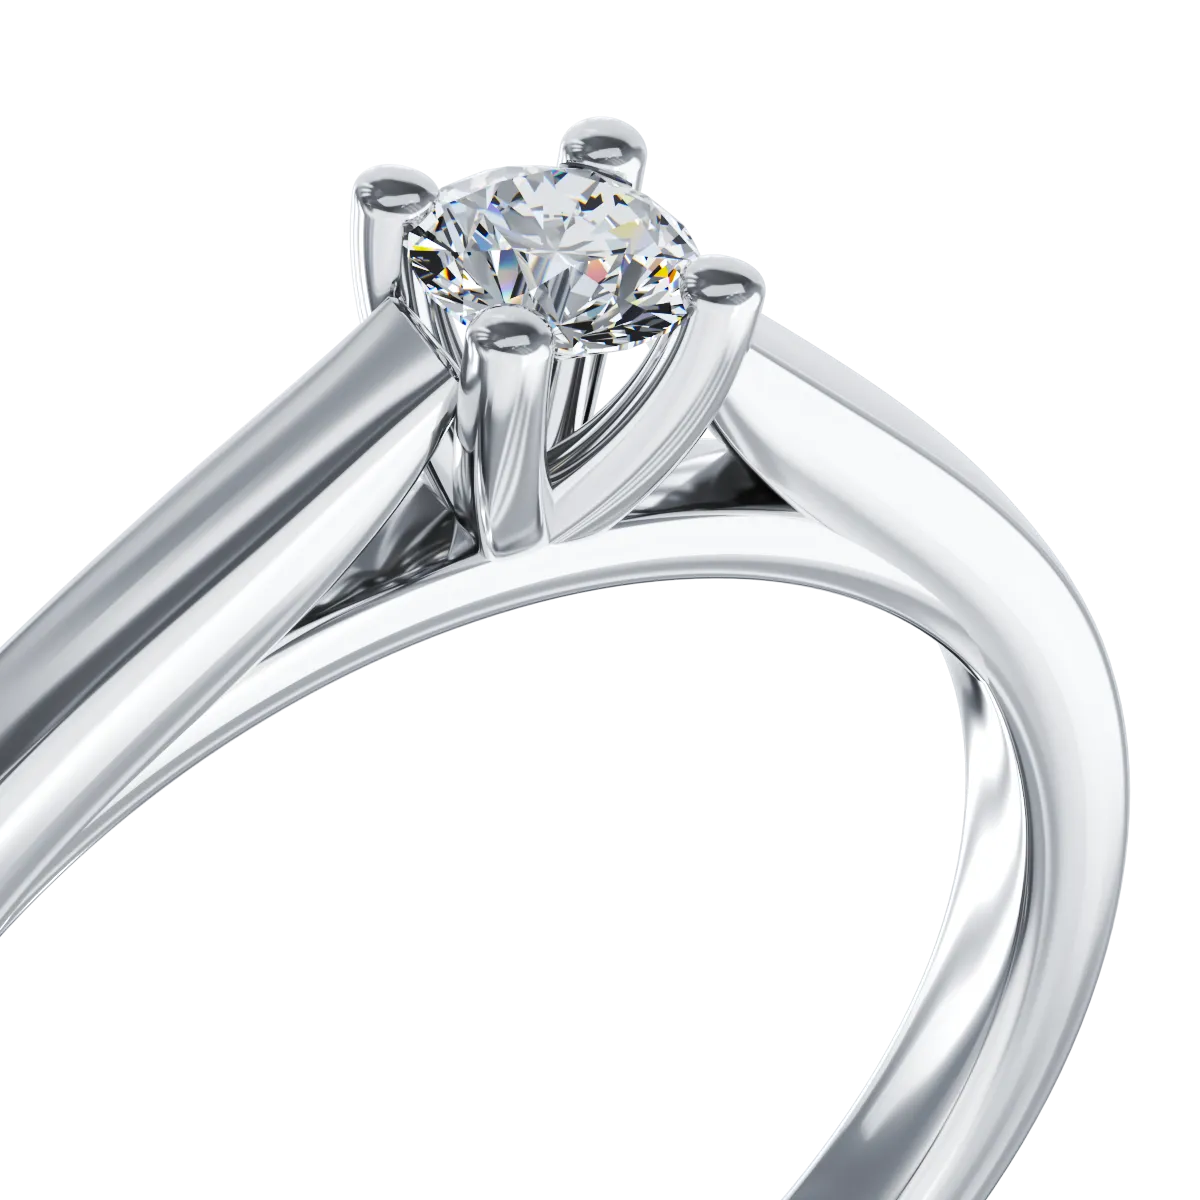 18K white gold engagement ring with a 0.14ct solitaire diamond